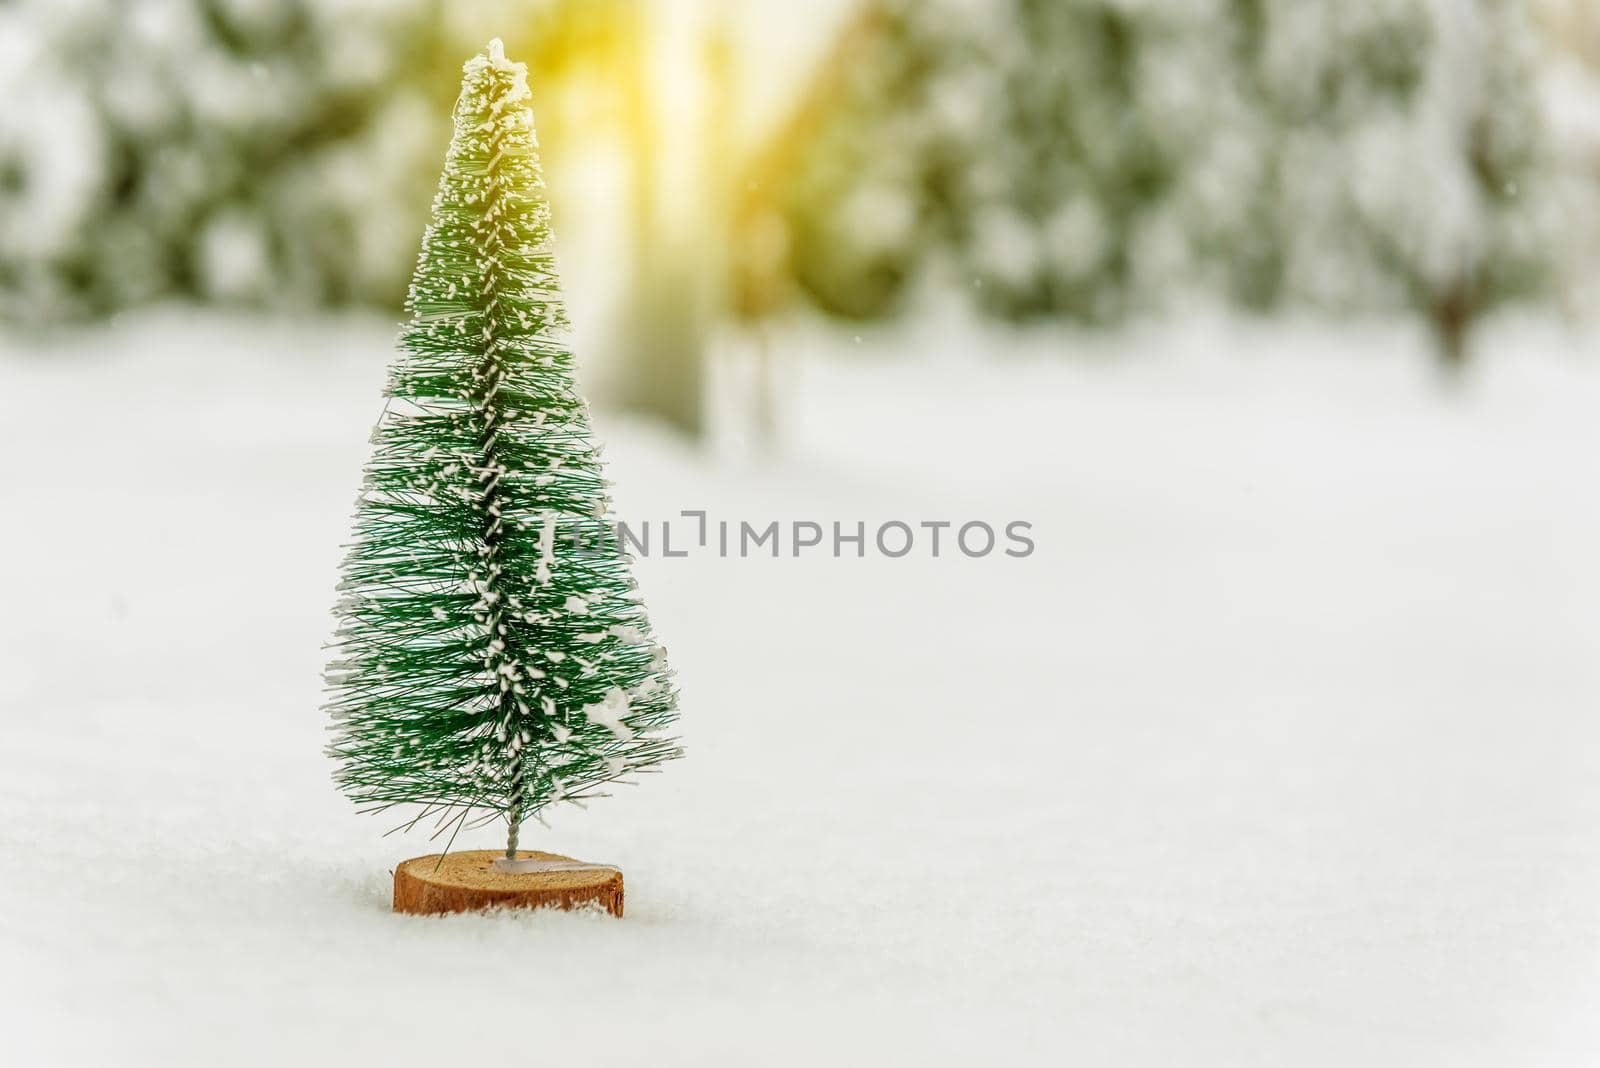 miniature Christmas tree in the snow 